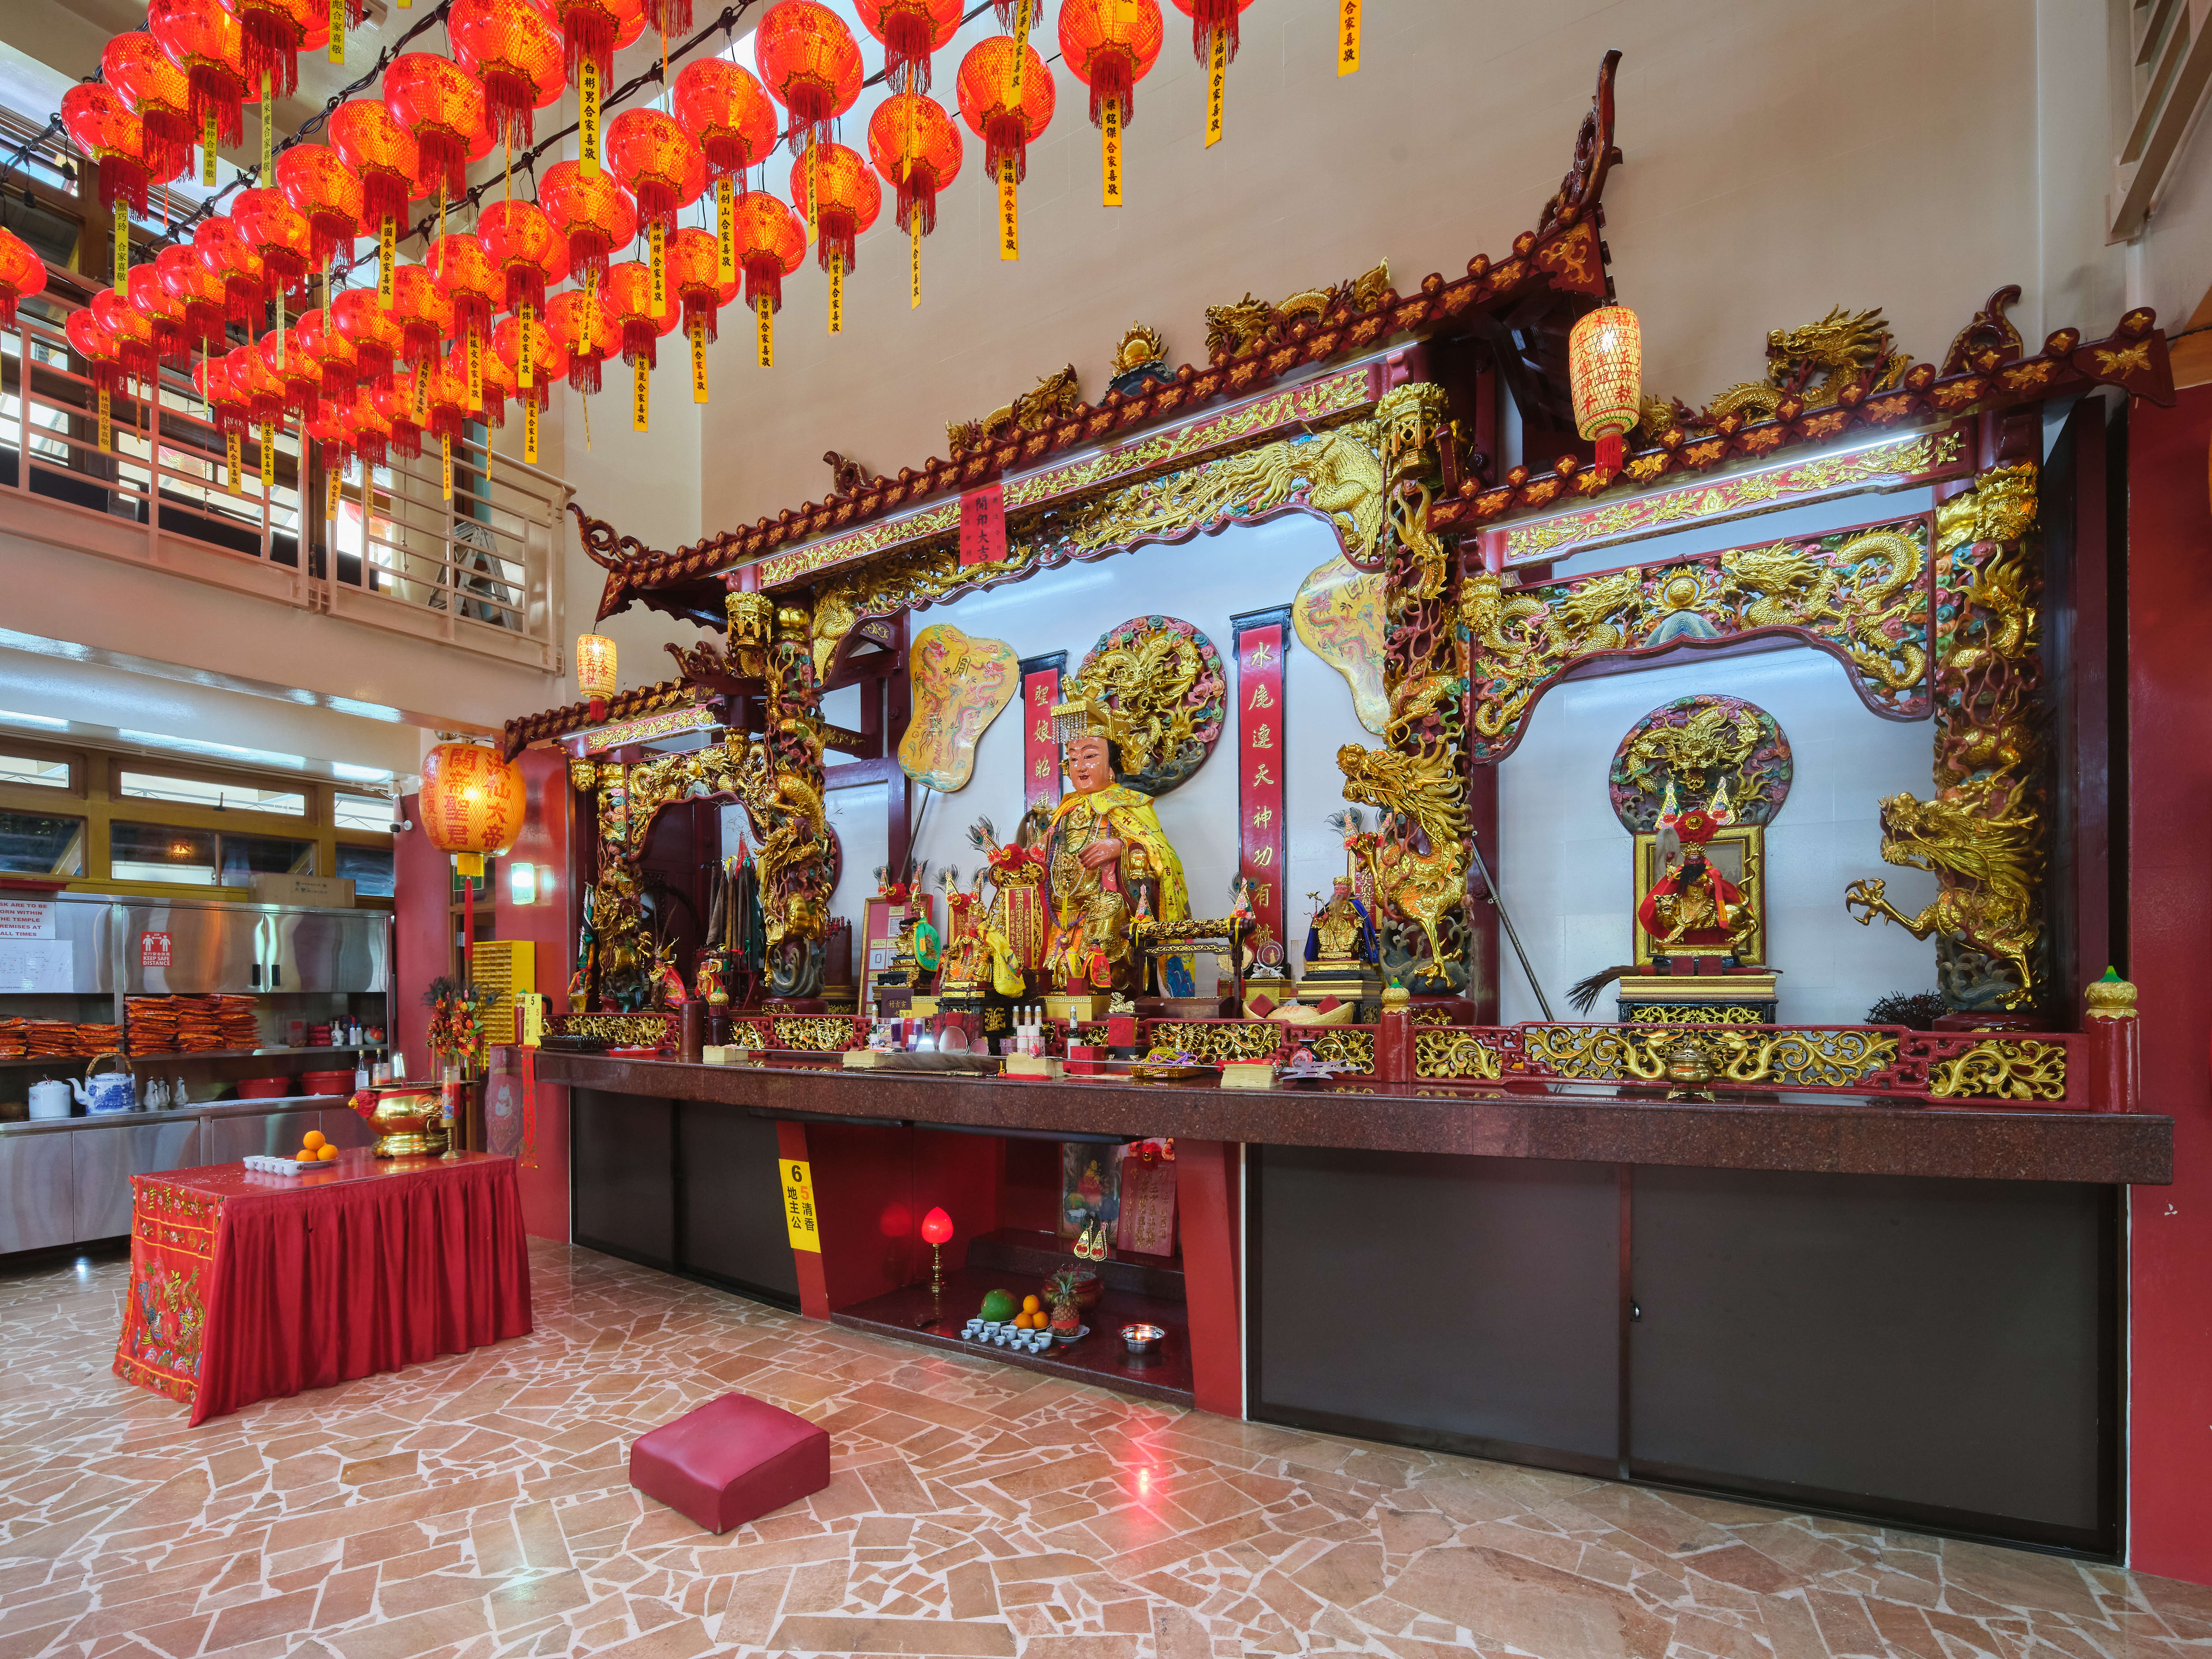 Altar of the temple with a statue of Shui Wei Shan Niang in the middle.